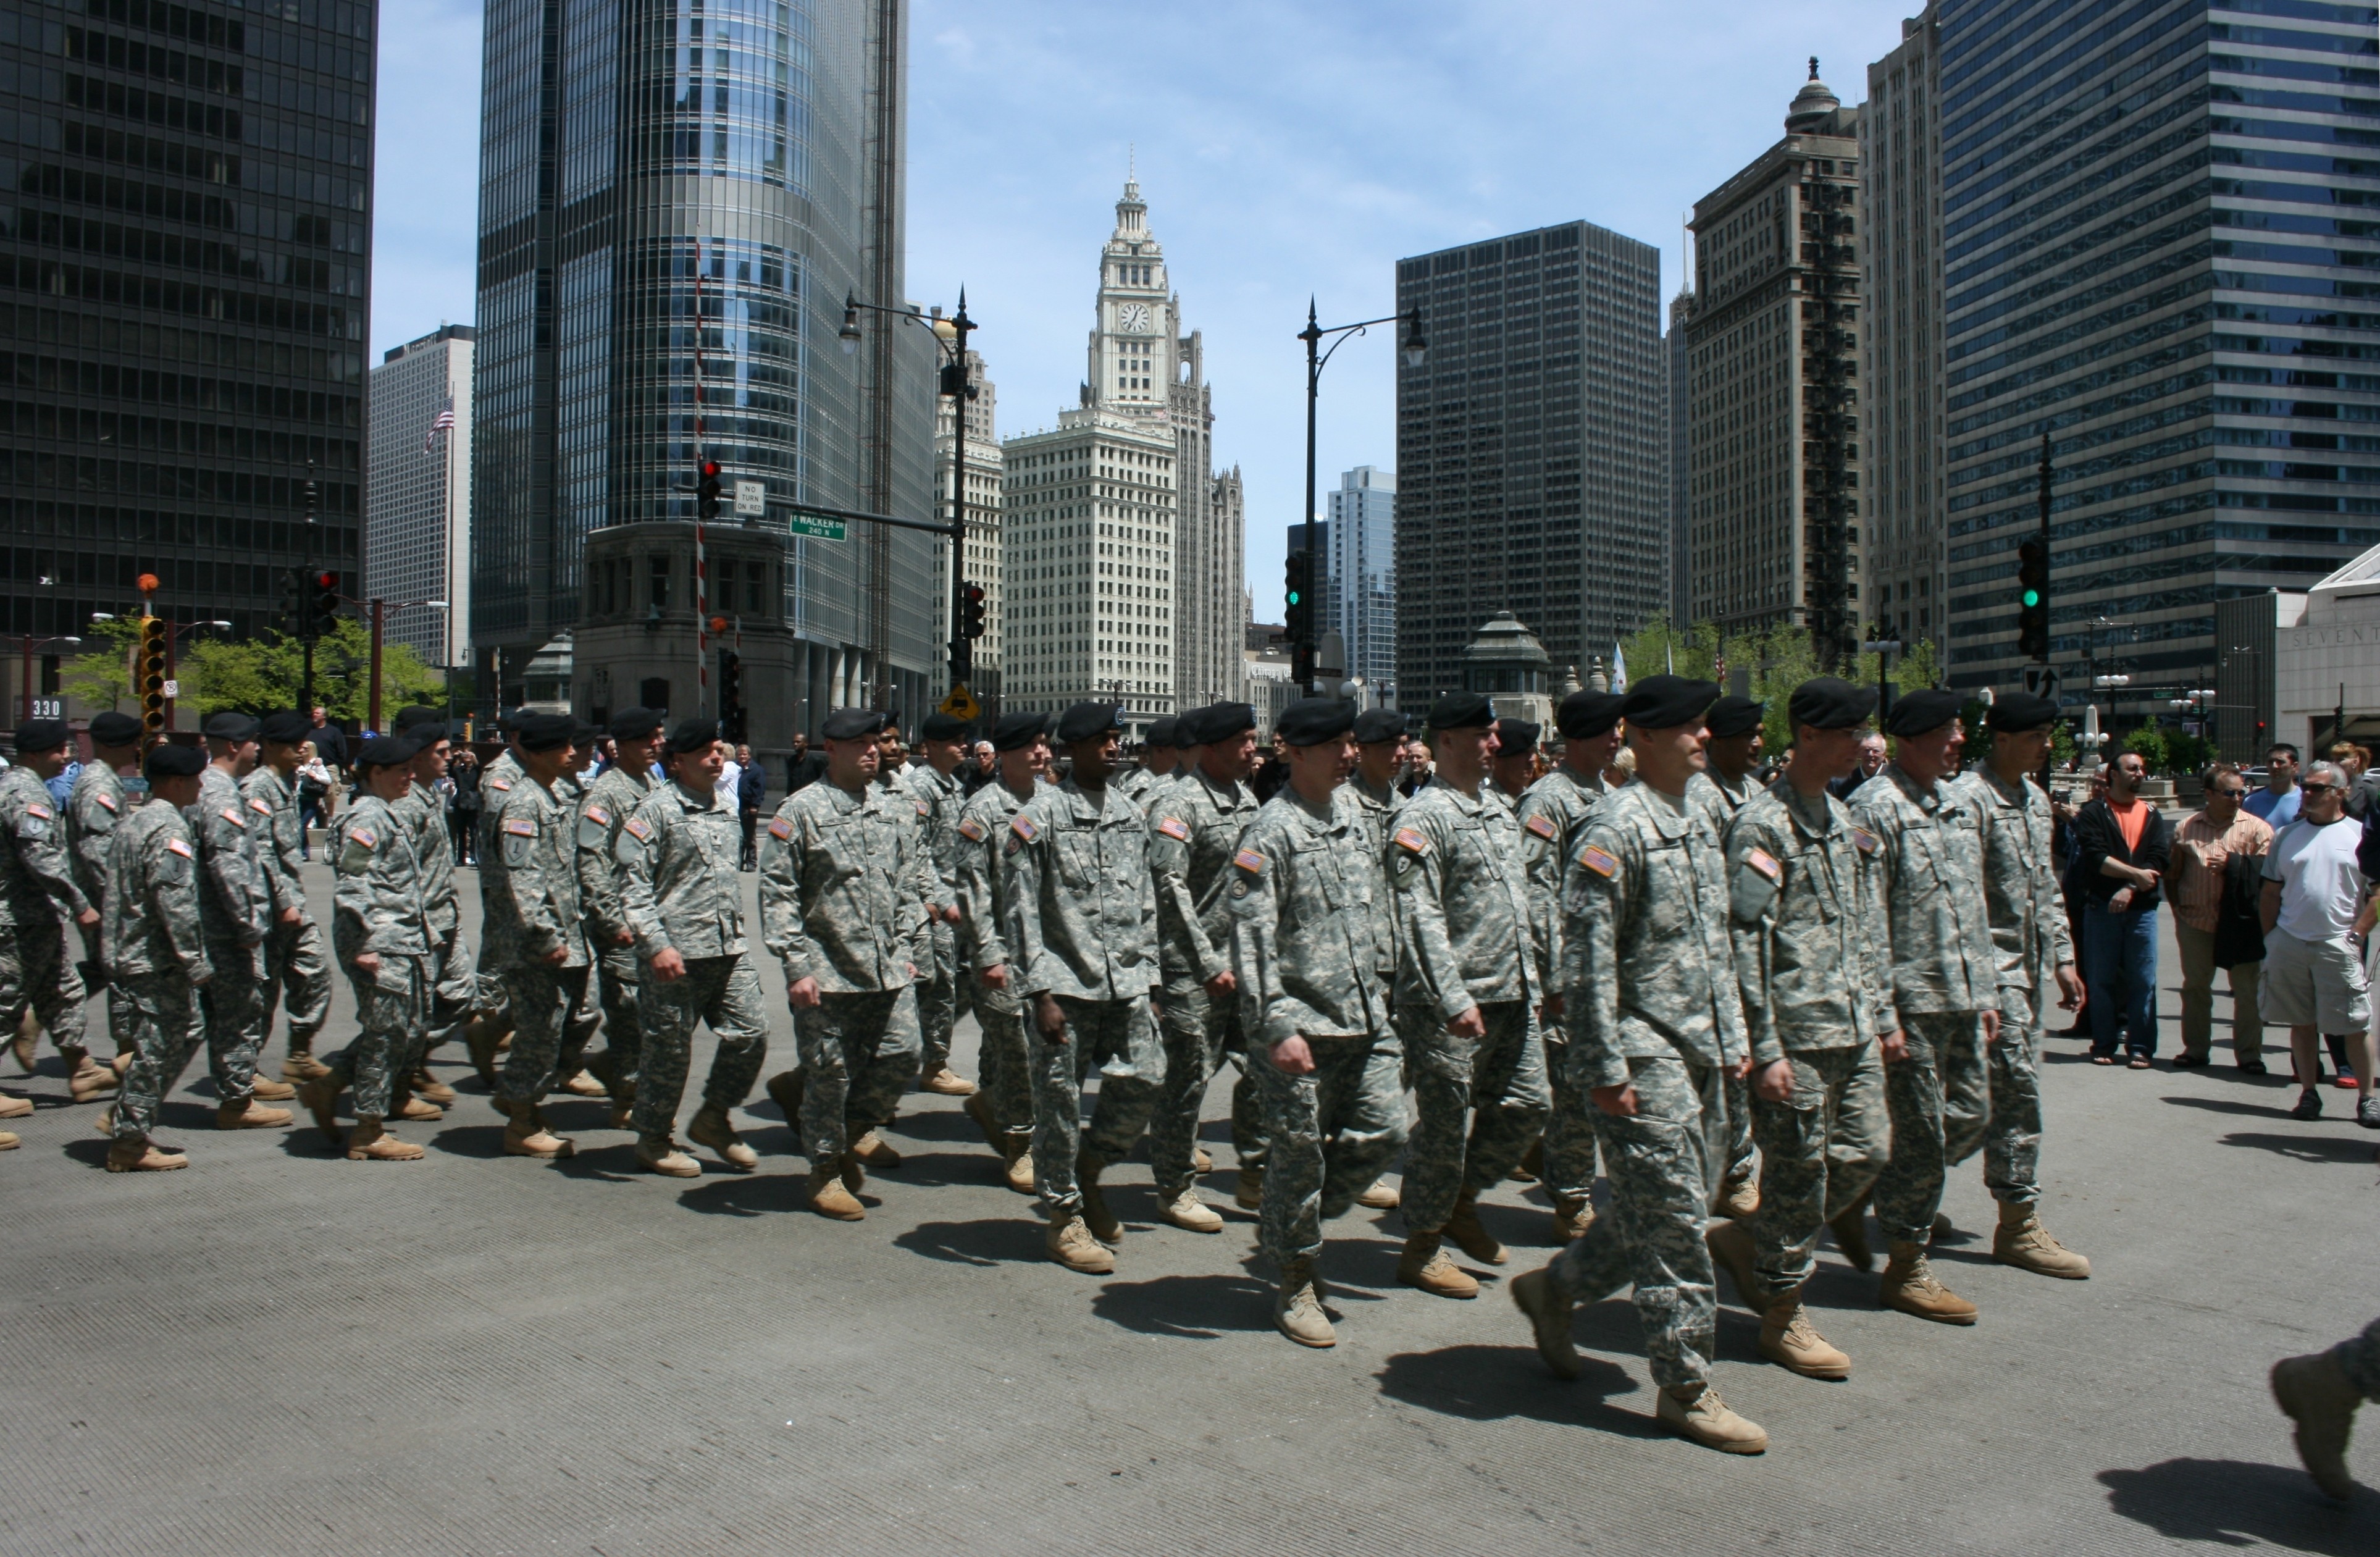 Memorial Day Observance and Parade in Chicago Article The United